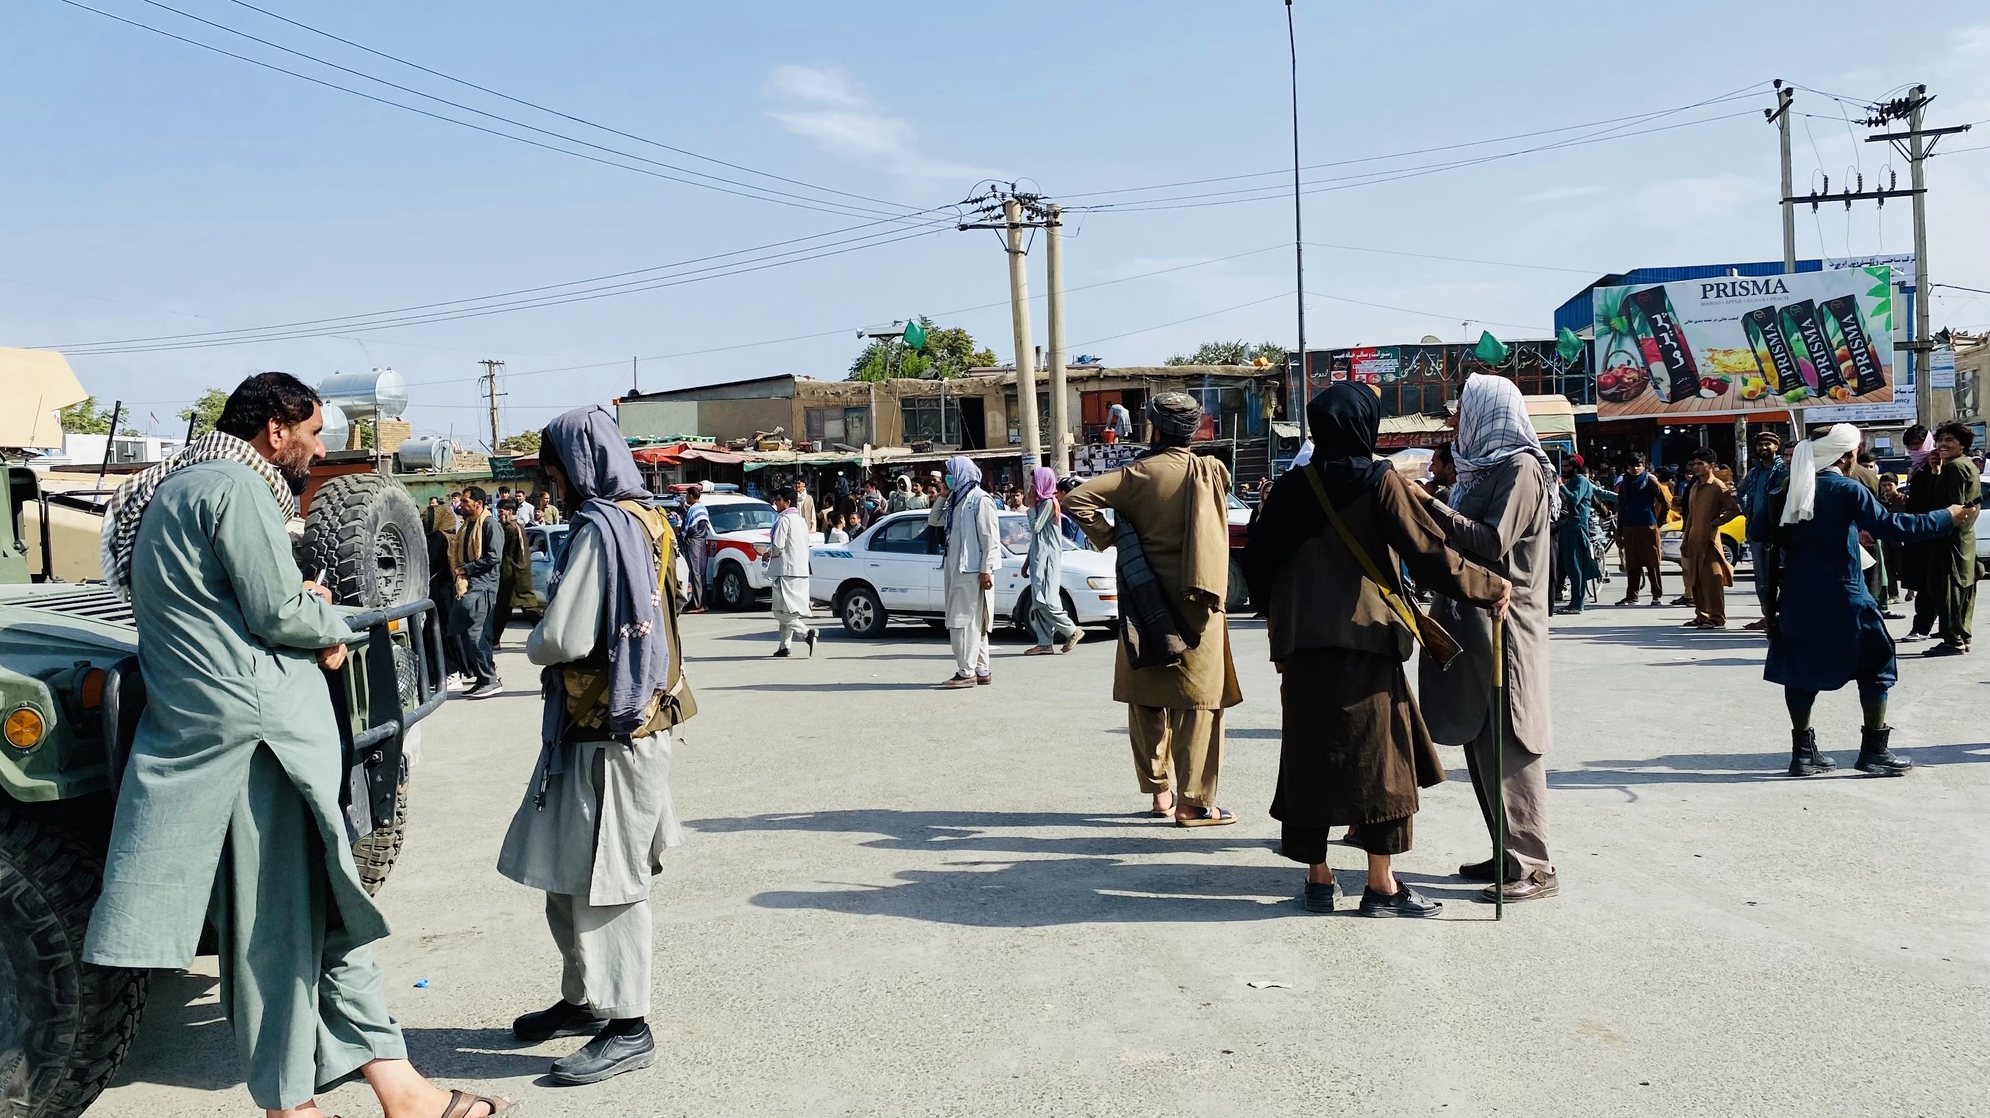 epa09421845 Taliban fighters stand guard as Afghans gather outside the Hamid Karzai International Airport to flee the country, in Kabul, Afghanistan, 20 August 2021. The Afghan interim council, formed to assist in the power transfer following President Ashraf Ghani&#039;s escape, has met several Taliban leaders to discuss issues related to control and security during the transition process. Fighting and violence have significantly reduced in Afghanistan with the surrender of the government troops and the resounding victory of the Taliban.  EPA/STRINGER